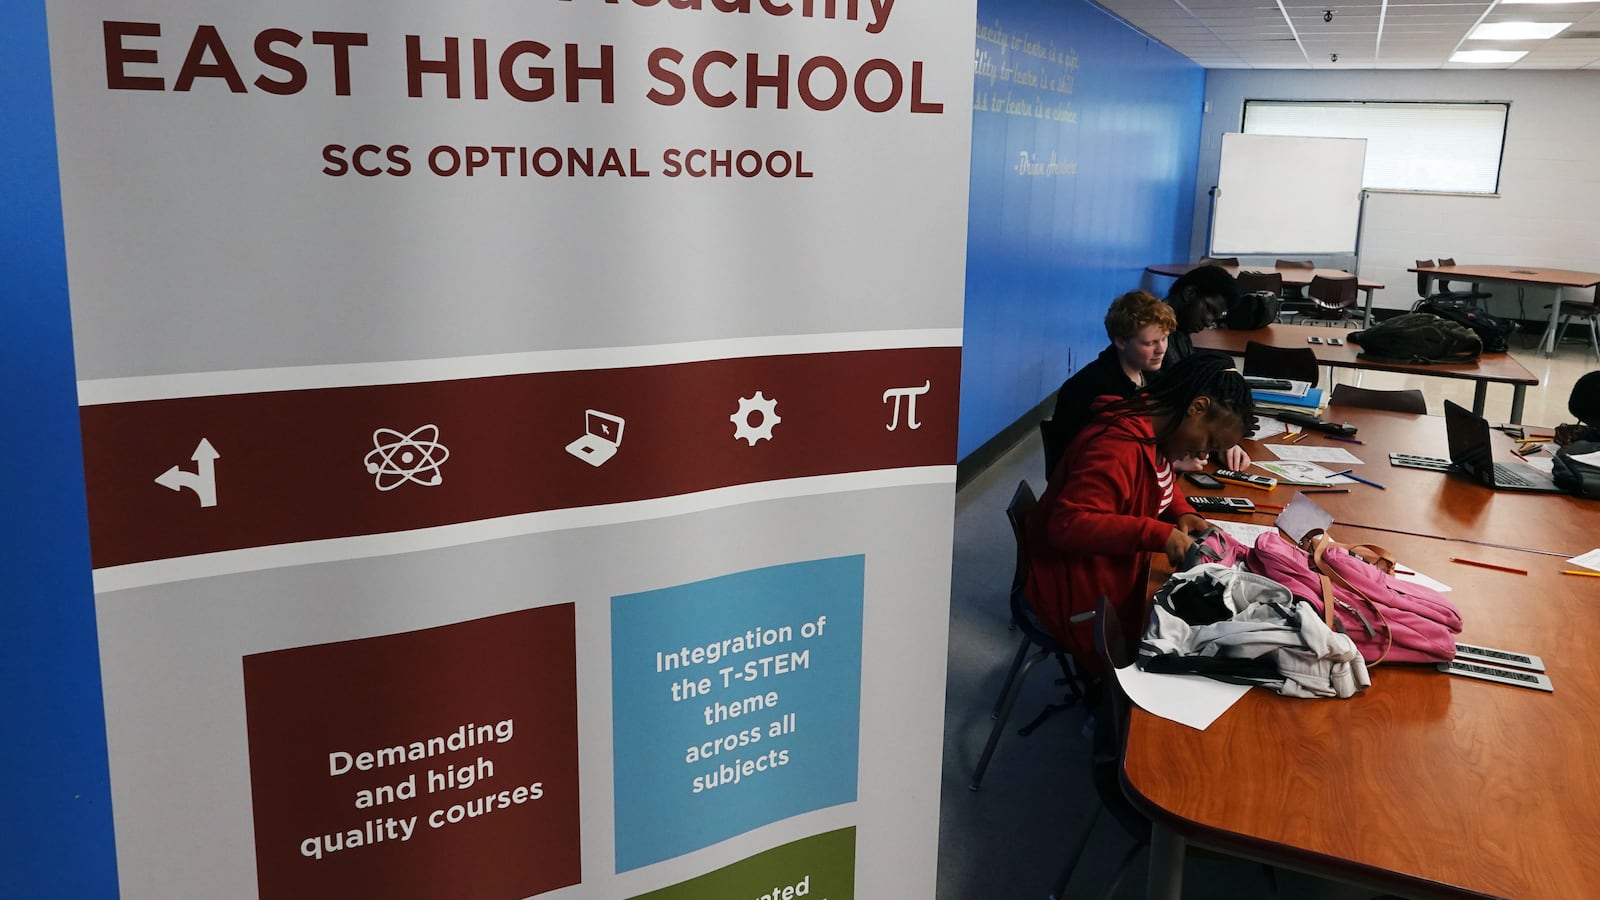 East High School is one of 46 optional schools offered by Shelby County Schools, where students can apply to take specialized  studies. The focus at East High is T-STEM, which stands for transportation, science, technology, engineering, and math.